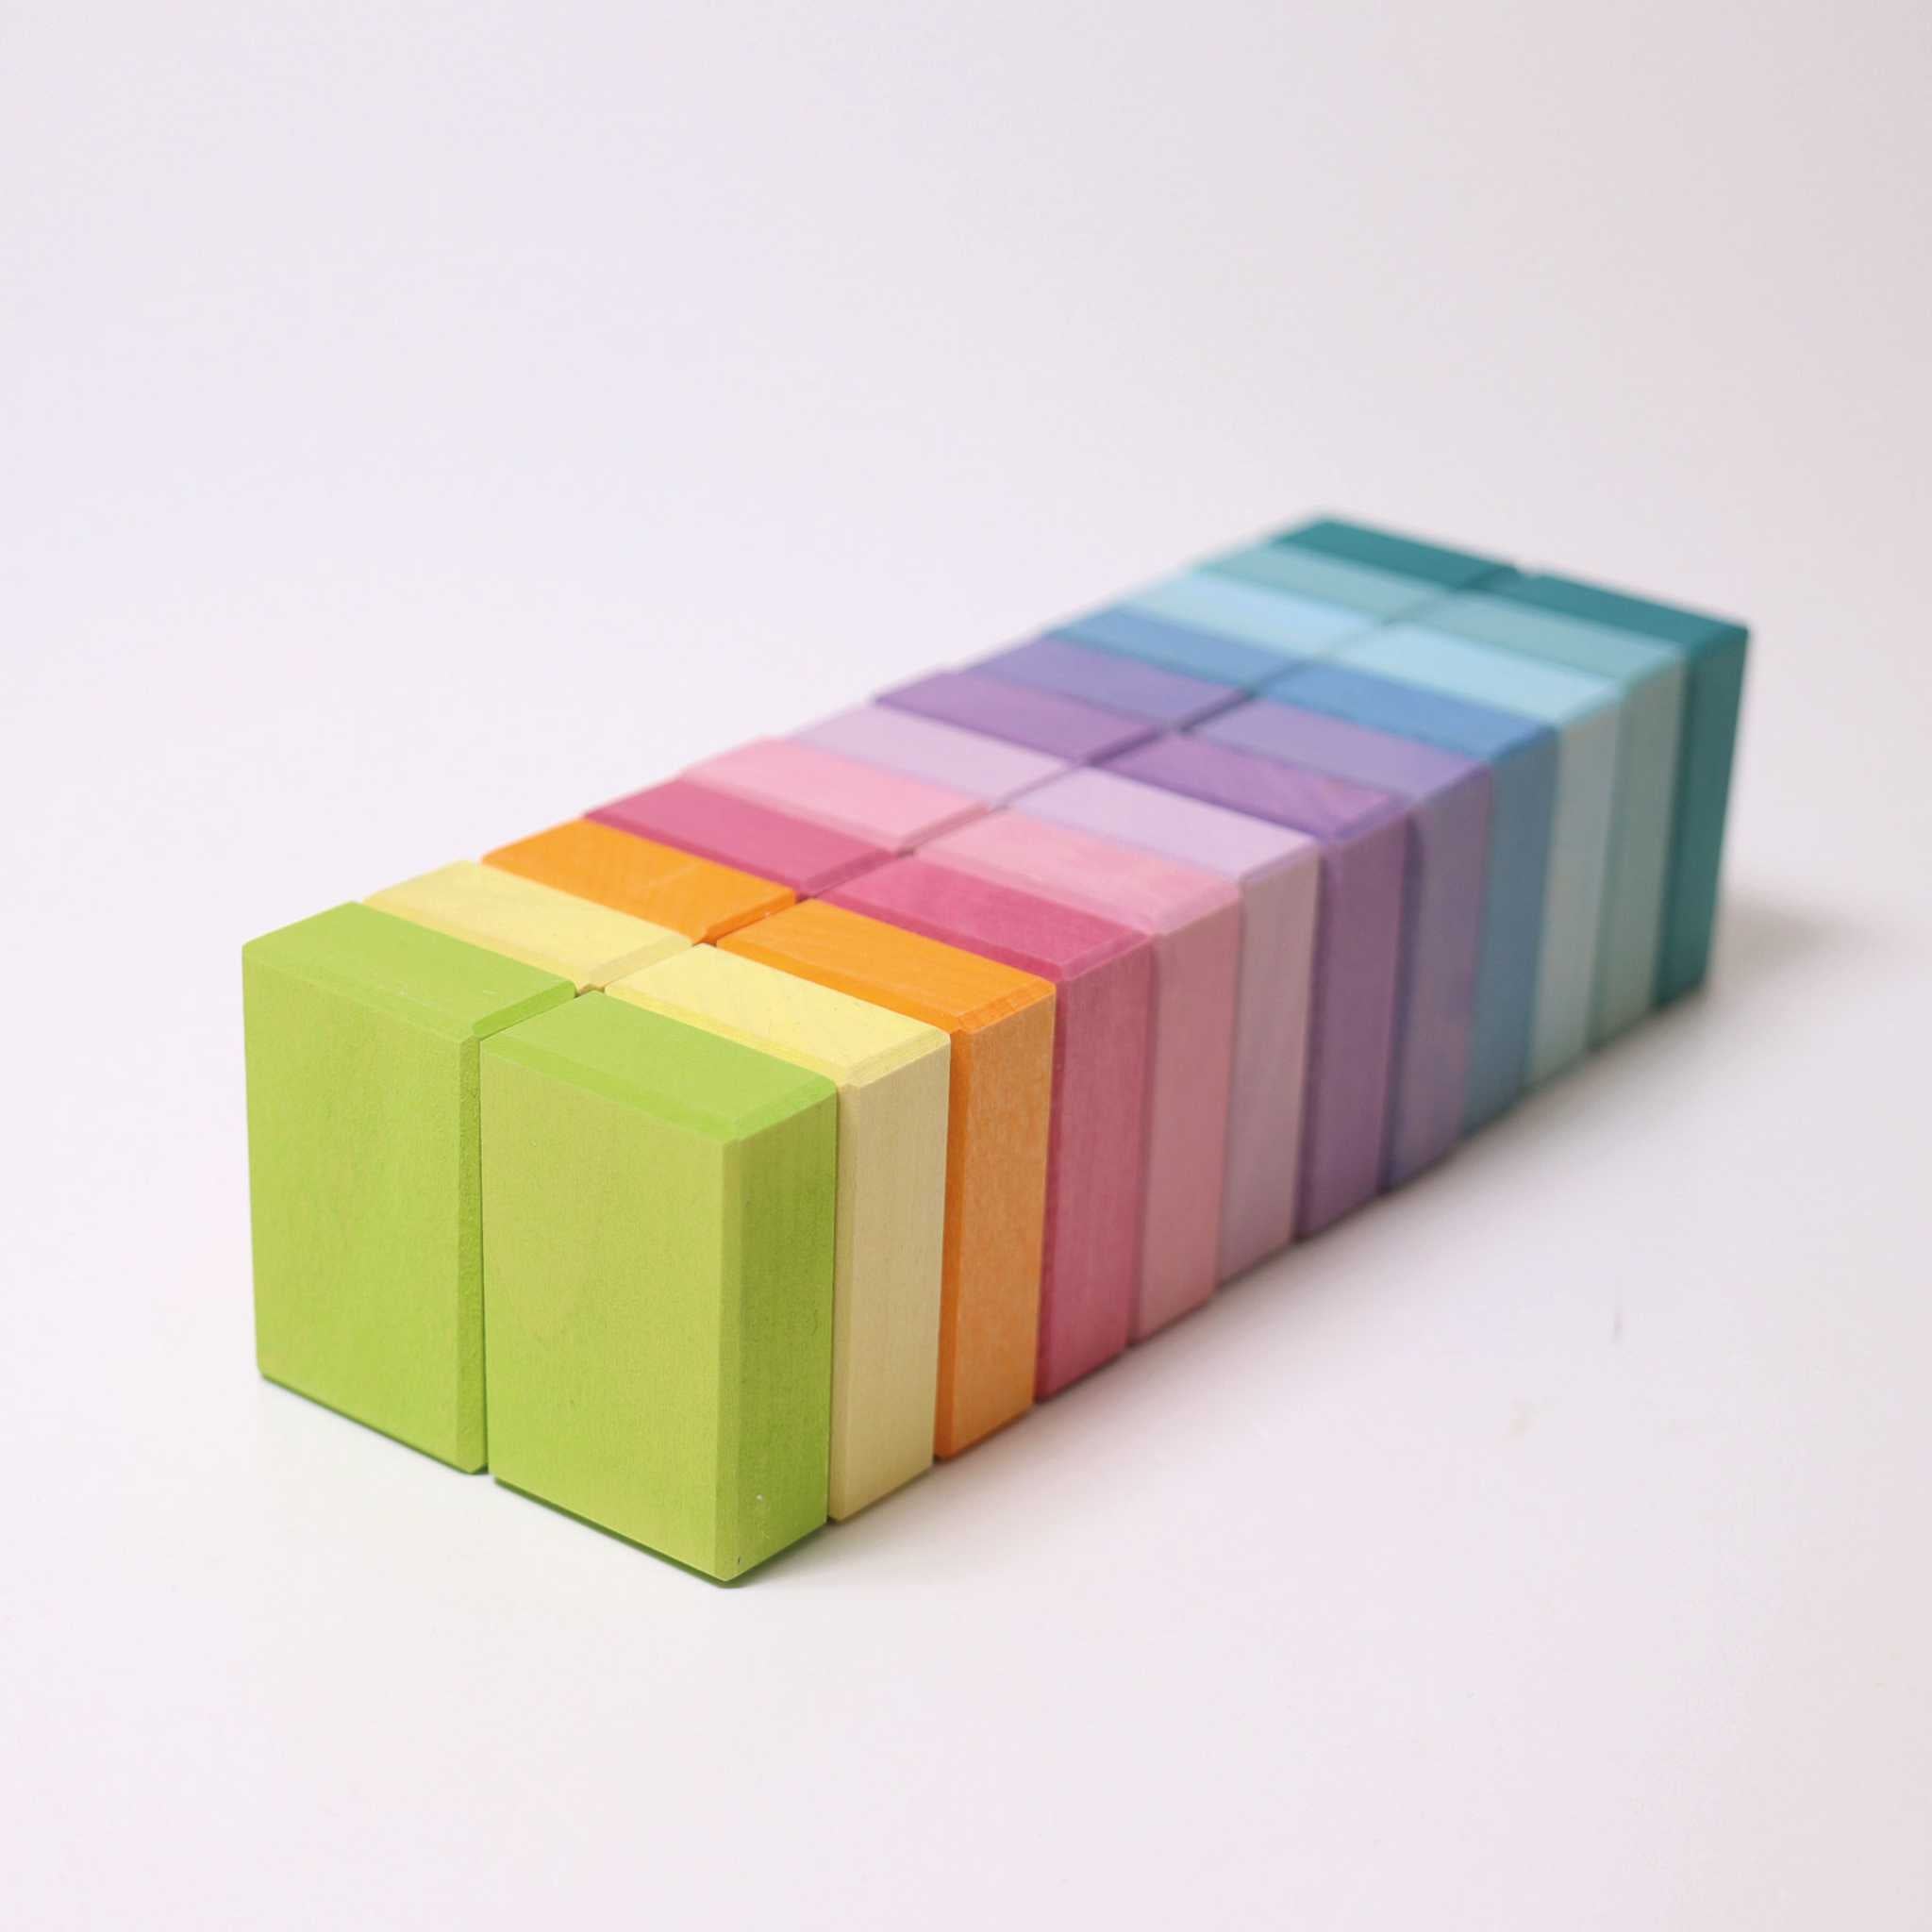  Grimm's Pastel Duo Building Blocks - Coloured Blocks Lined Up